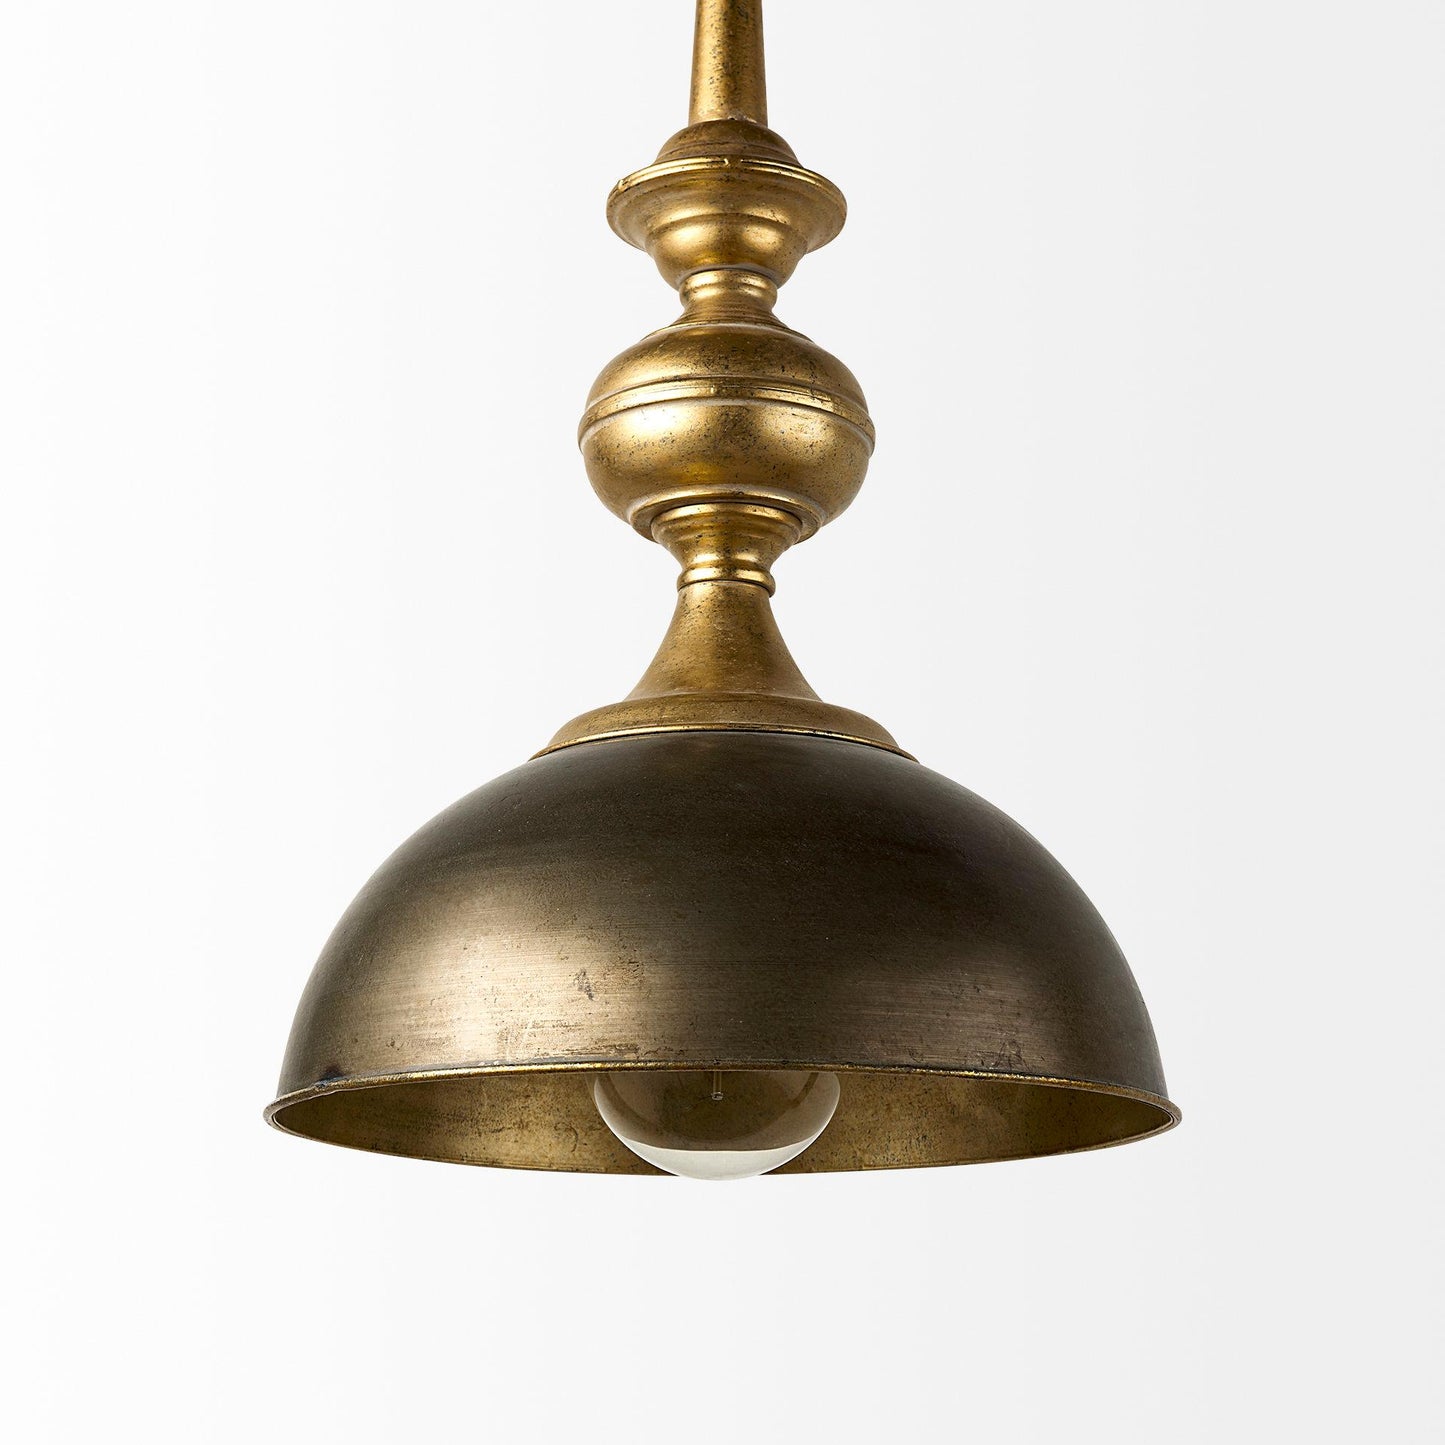 Capsa 17x29 Antique Gold and Silver Toned Metal Dome Pendant Light